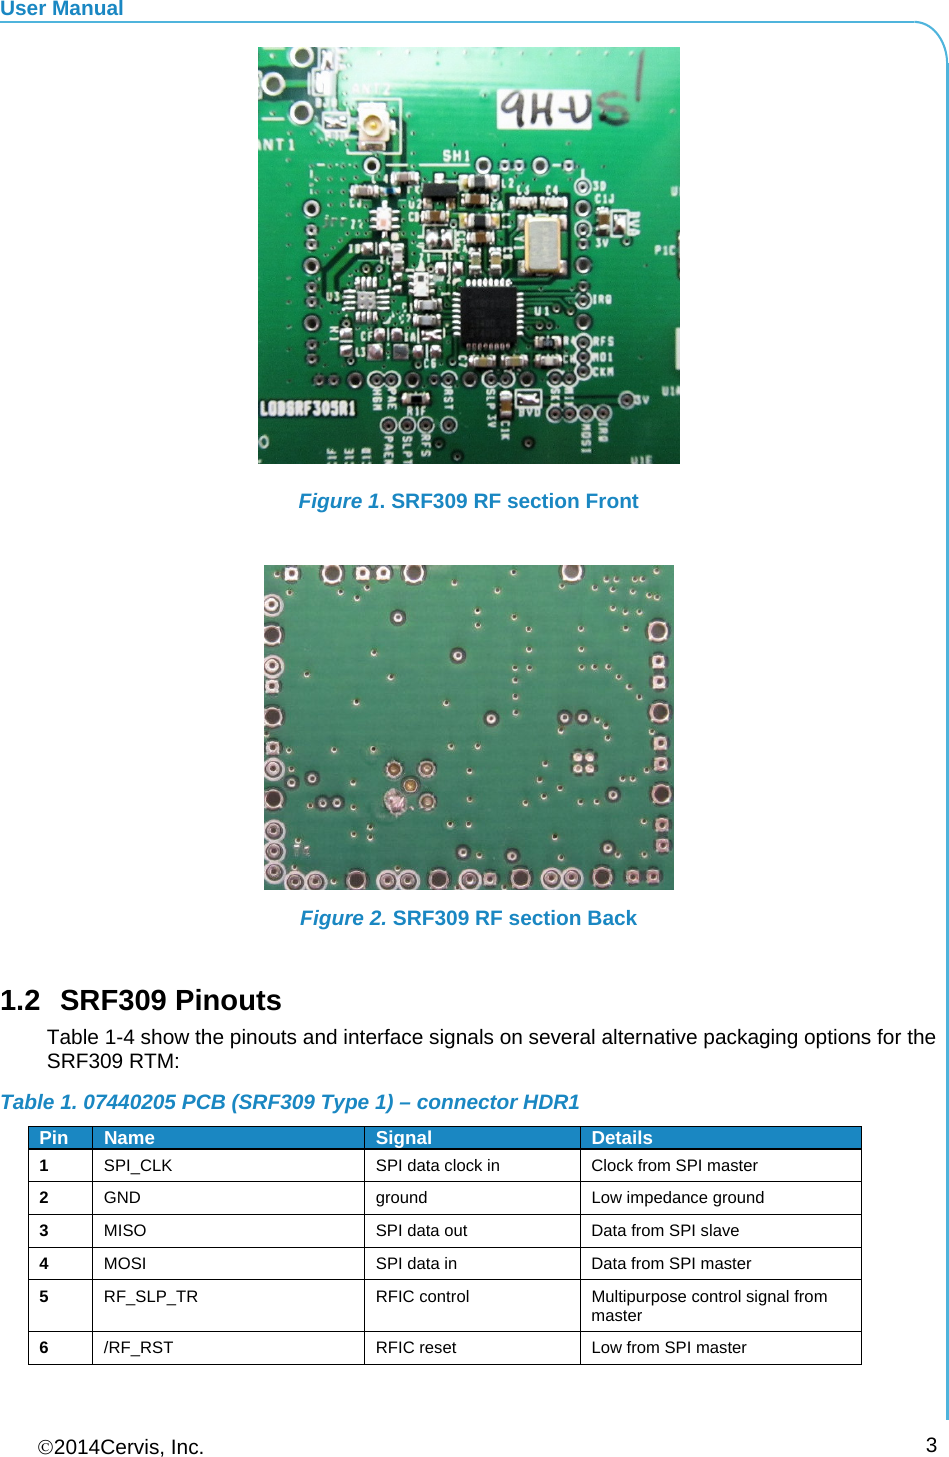 User Manual 2014Cervis, Inc.      3  Figure 1. SRF309 RF section Front   Figure 2. SRF309 RF section Back  1.2 SRF309 Pinouts Table 1-4 show the pinouts and interface signals on several alternative packaging options for the SRF309 RTM: Table 1. 07440205 PCB (SRF309 Type 1) – connector HDR1 Pin  Name  Signal Details1  SPI_CLK  SPI data clock in  Clock from SPI master 2  GND ground Low impedance ground 3  MISO  SPI data out  Data from SPI slave 4  MOSI  SPI data in  Data from SPI master 5  RF_SLP_TR RFIC control Multipurpose control signal from master 6  /RF_RST  RFIC reset  Low from SPI master 